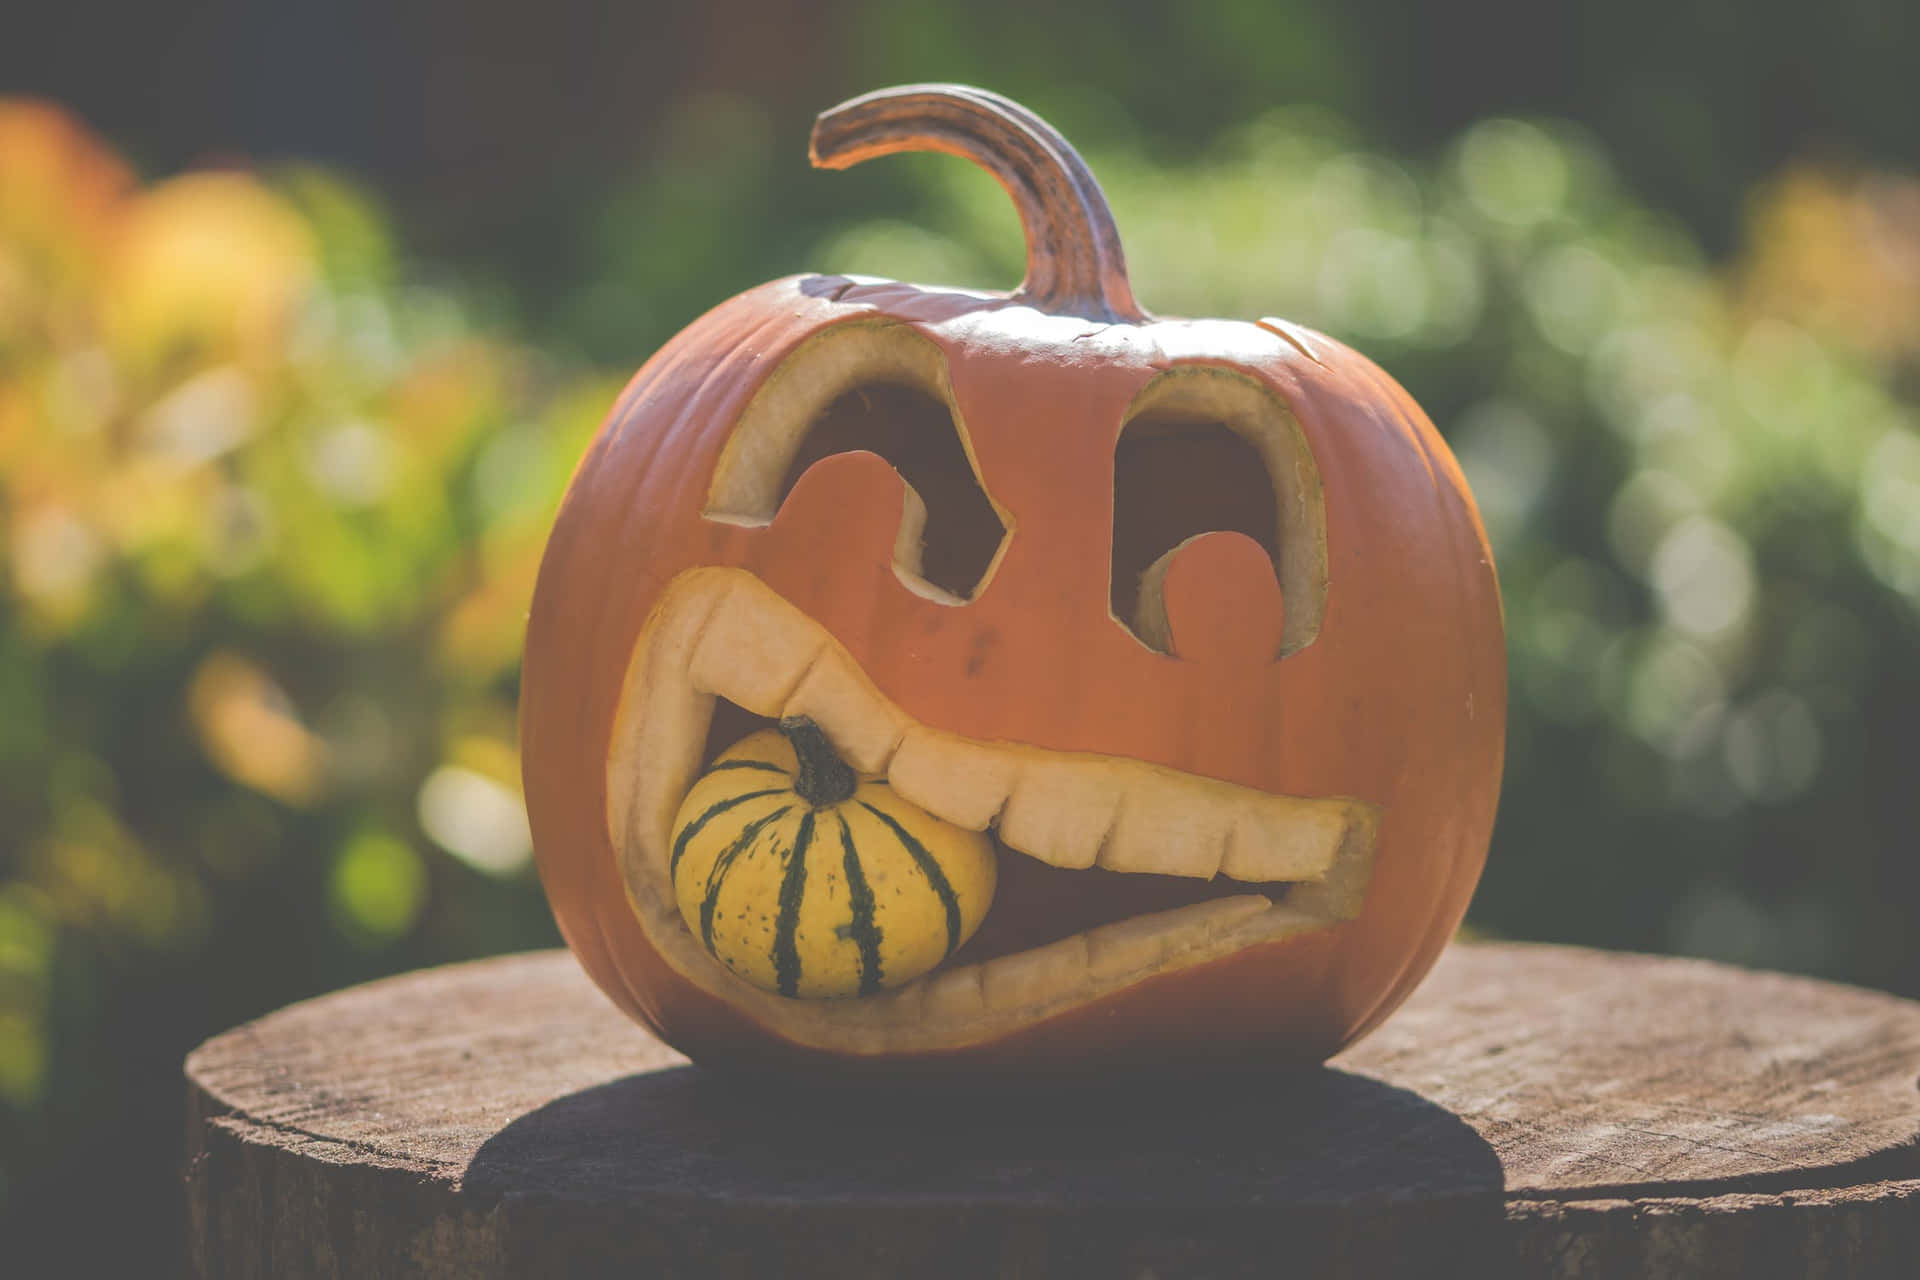 A carefully carved pumpkin display featuring festive Halloween designs.